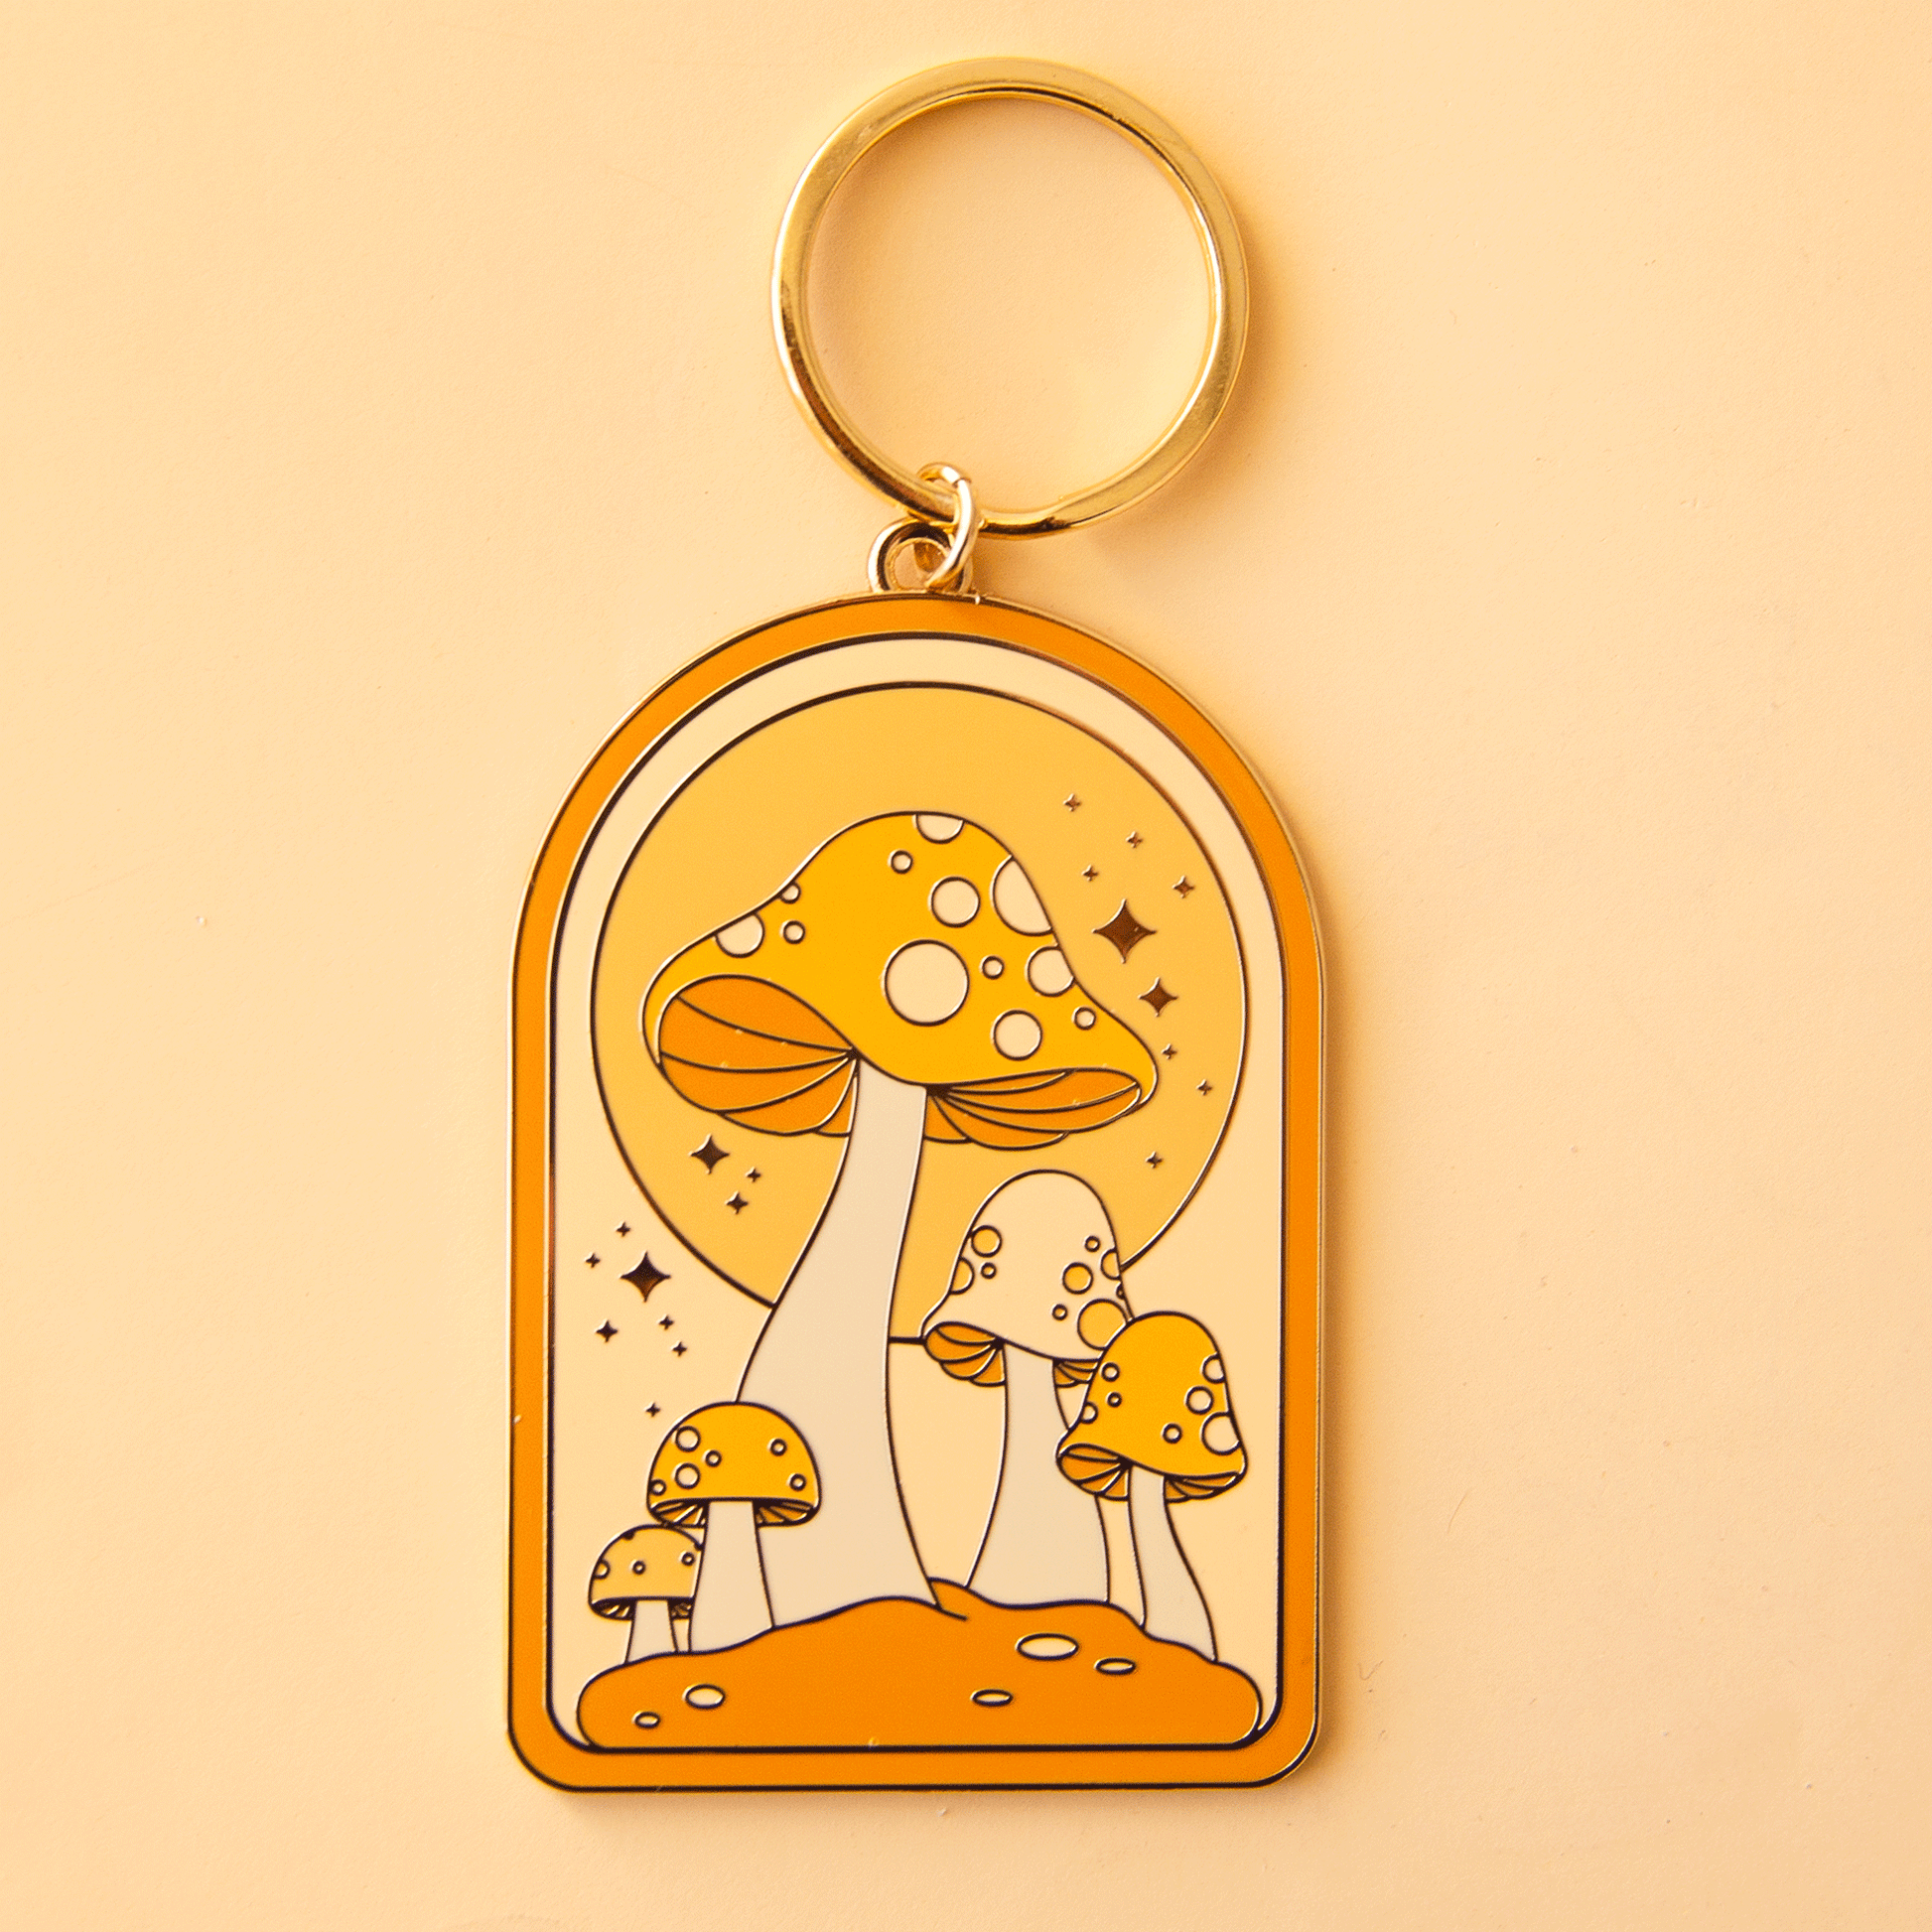 On a yellow background is an arched metal keychain is a gold loop and a mushroom design.